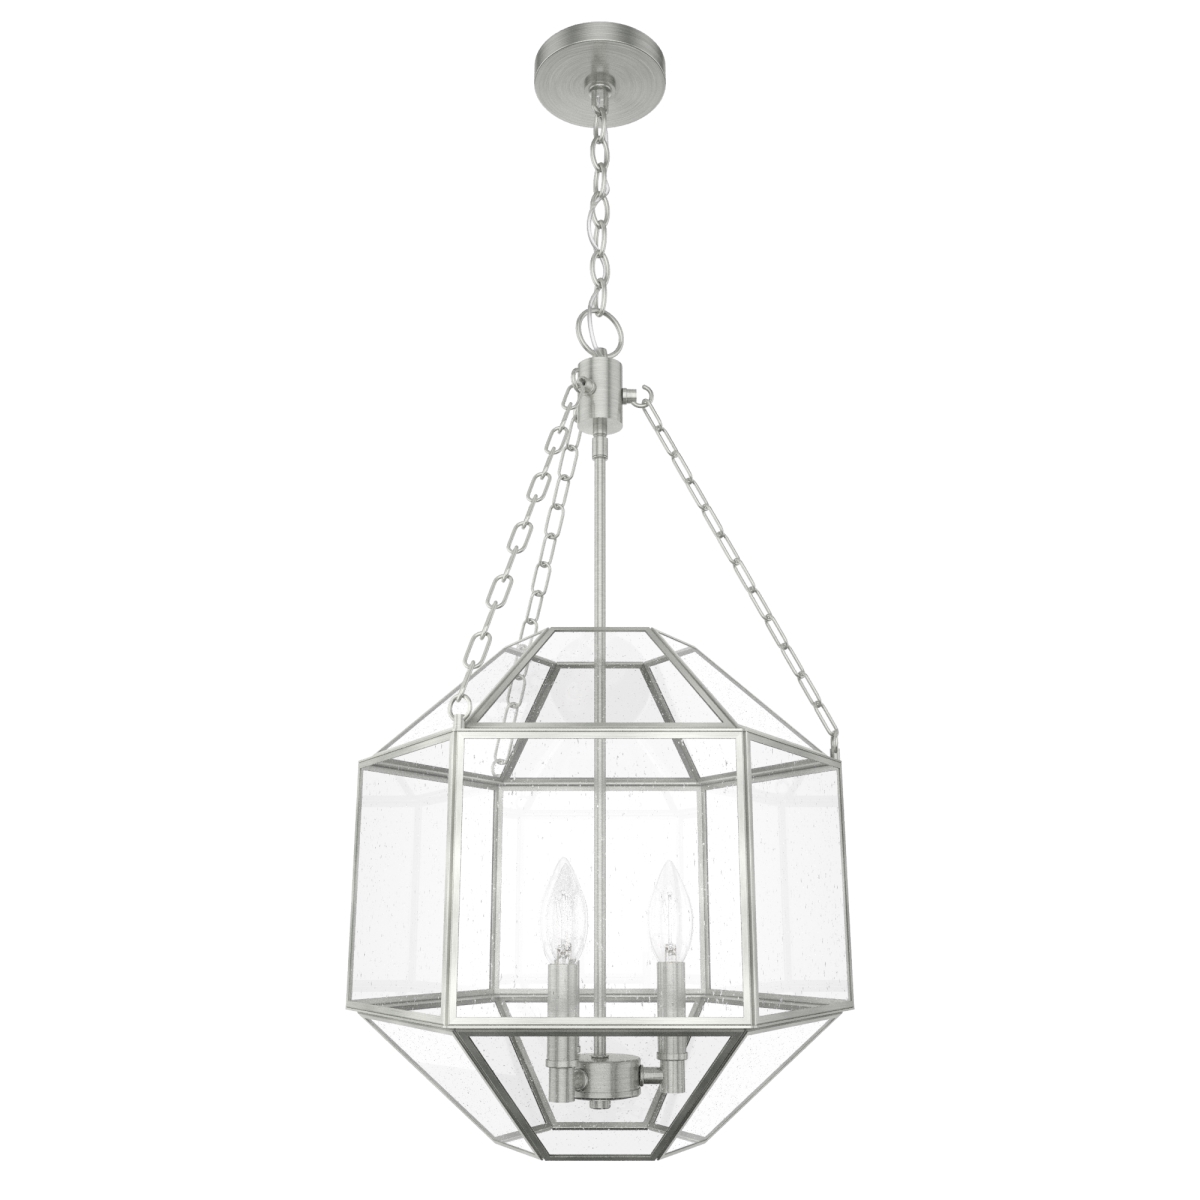 Hunter 19366 25 in. Indria Brushed Nickel with Seeded Glass 3 Light Pendant Ceiling Light Fixture